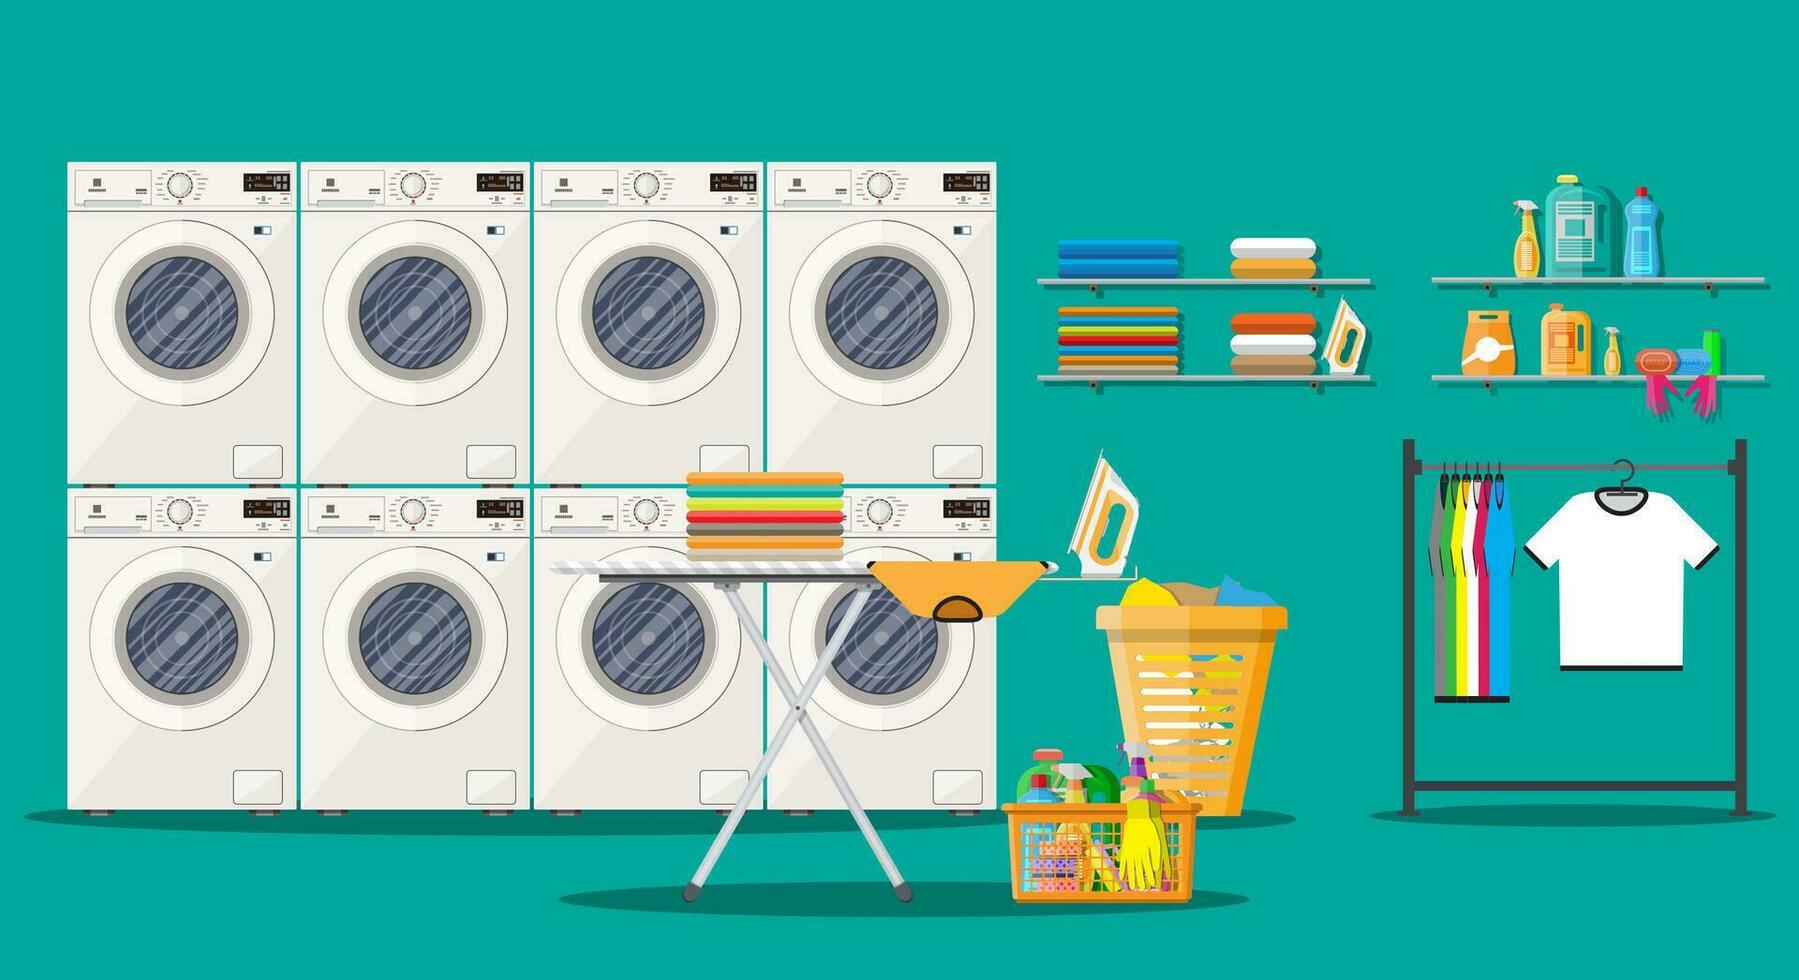 Laundry room interior with washing machine, ironing board, iron, clothes rack, household chemistry cleaning, washing powder and basket. Vector illustration in flat style